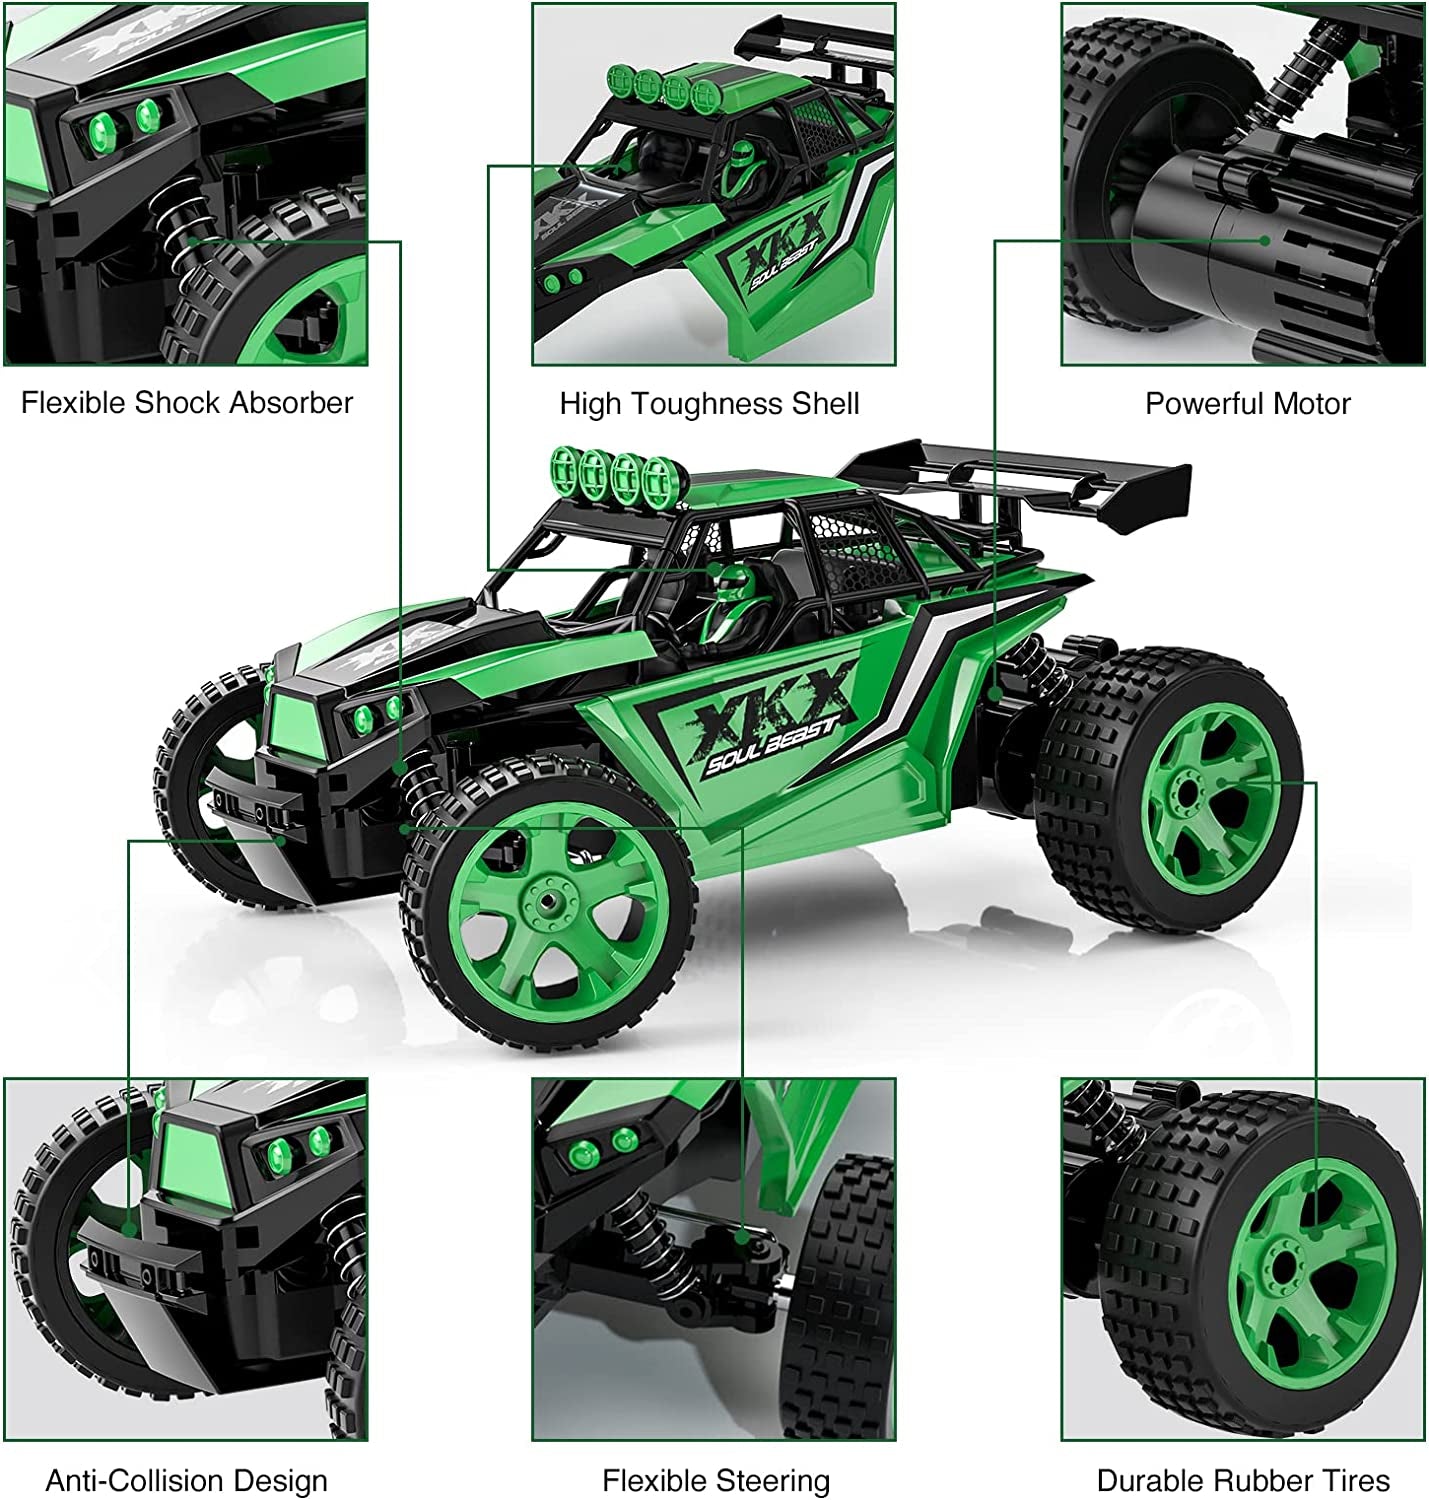 2.4GHz 20 KM/H High Speed Remote Control Car,1:18 2WD Offroad Racing Car with Two Rechargeable Batteries for 60 Min Play